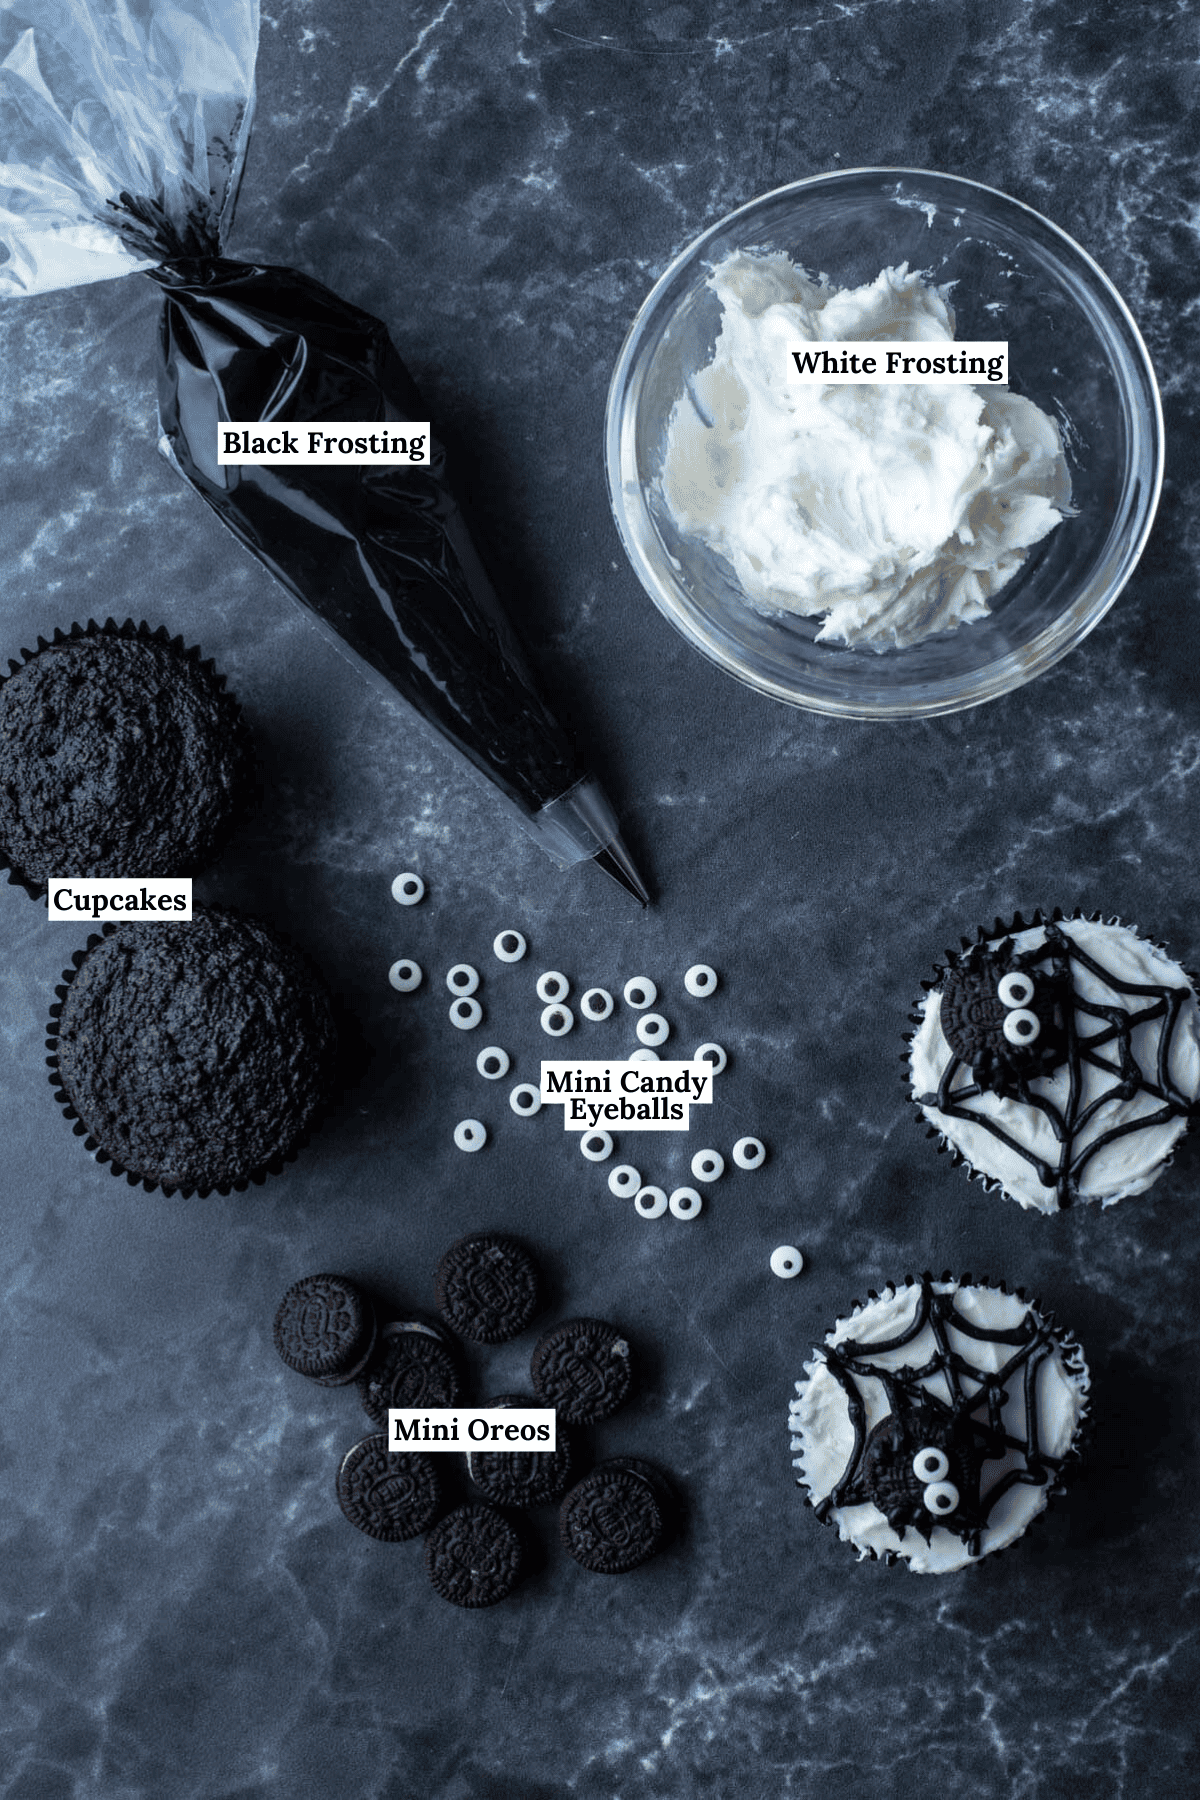 ingredients for spider web cupcakes including white frosting, black frosting, chocolate cupcakes, mini candy eyeballs, and mini oreos